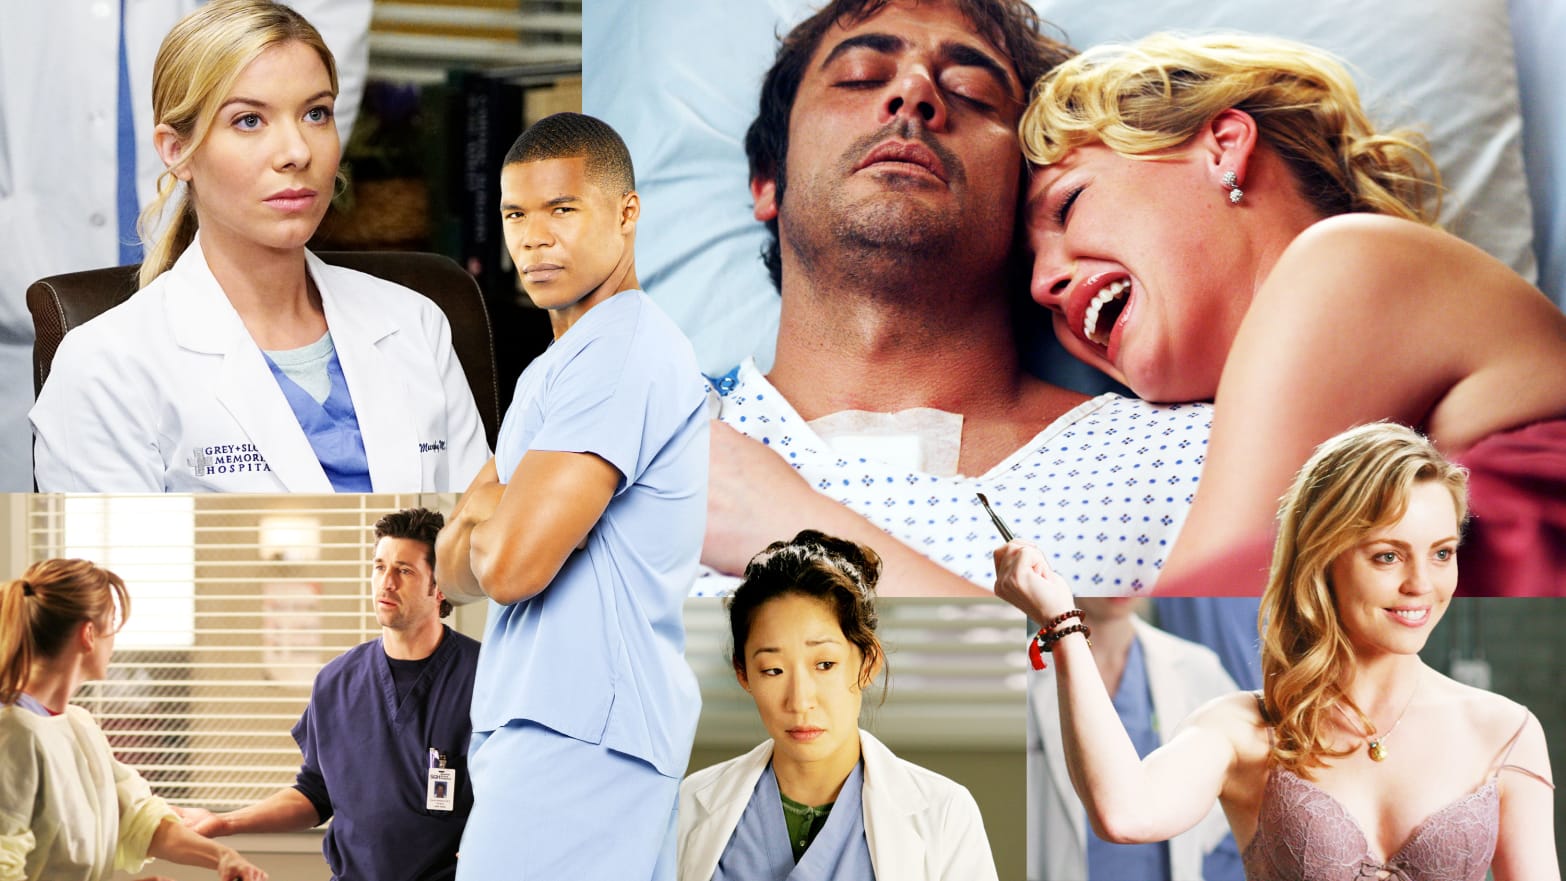 A photo illustration of production stills from Grey's Anatomy.